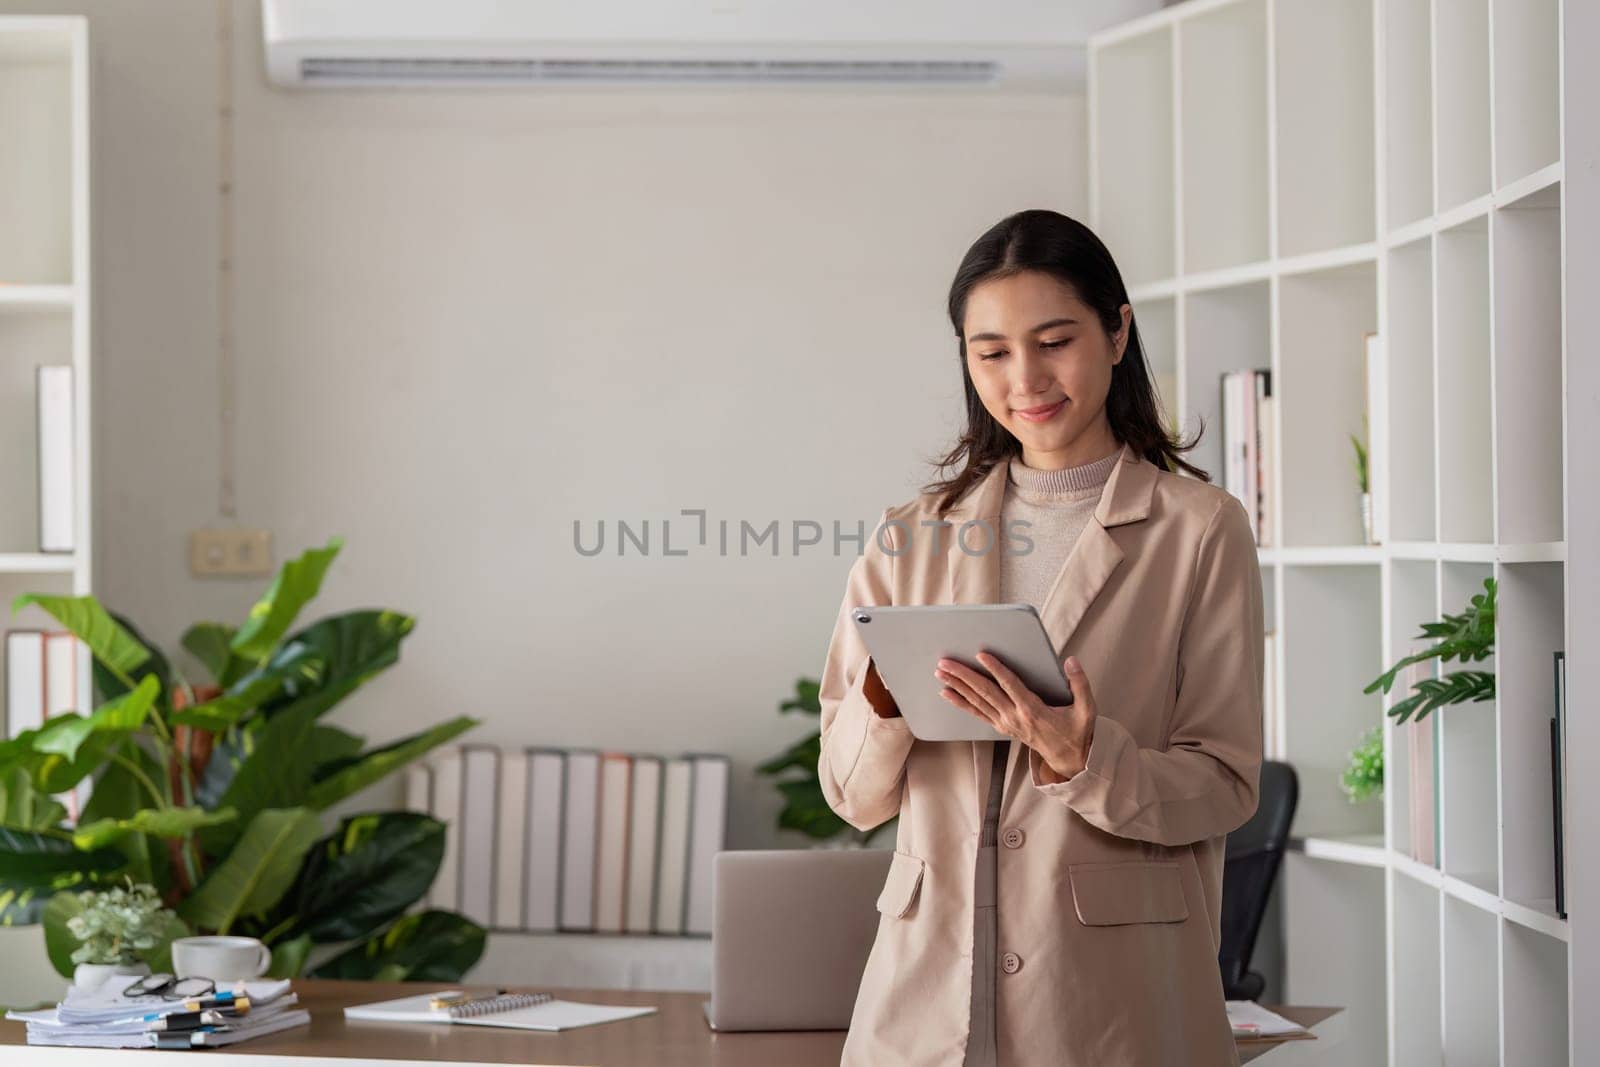 Smiling professional business woman entrepreneur holding digital tablet pad standing in office at work.